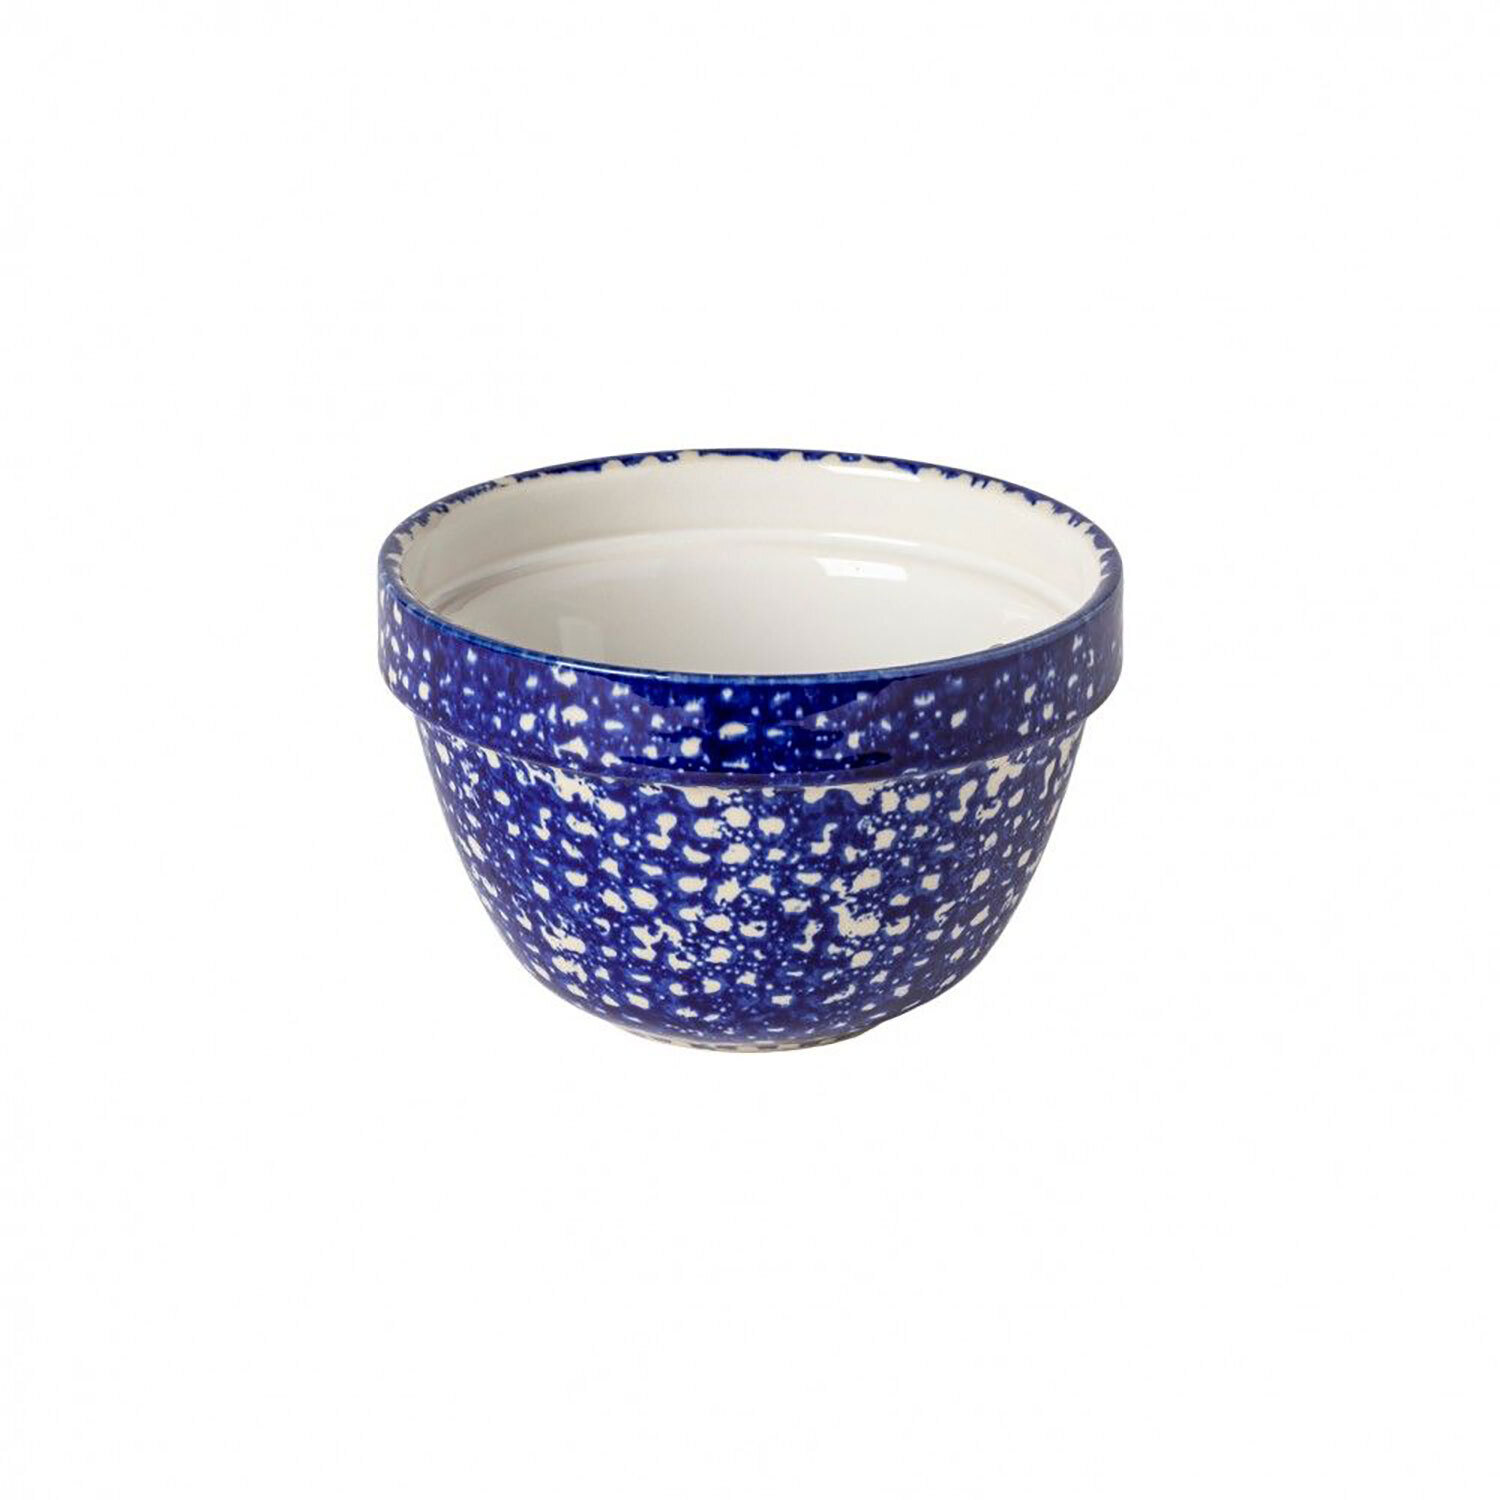 Casafina Abbey Blue White Splatter Mixing Bowl 7 Inch MBS171-BWH